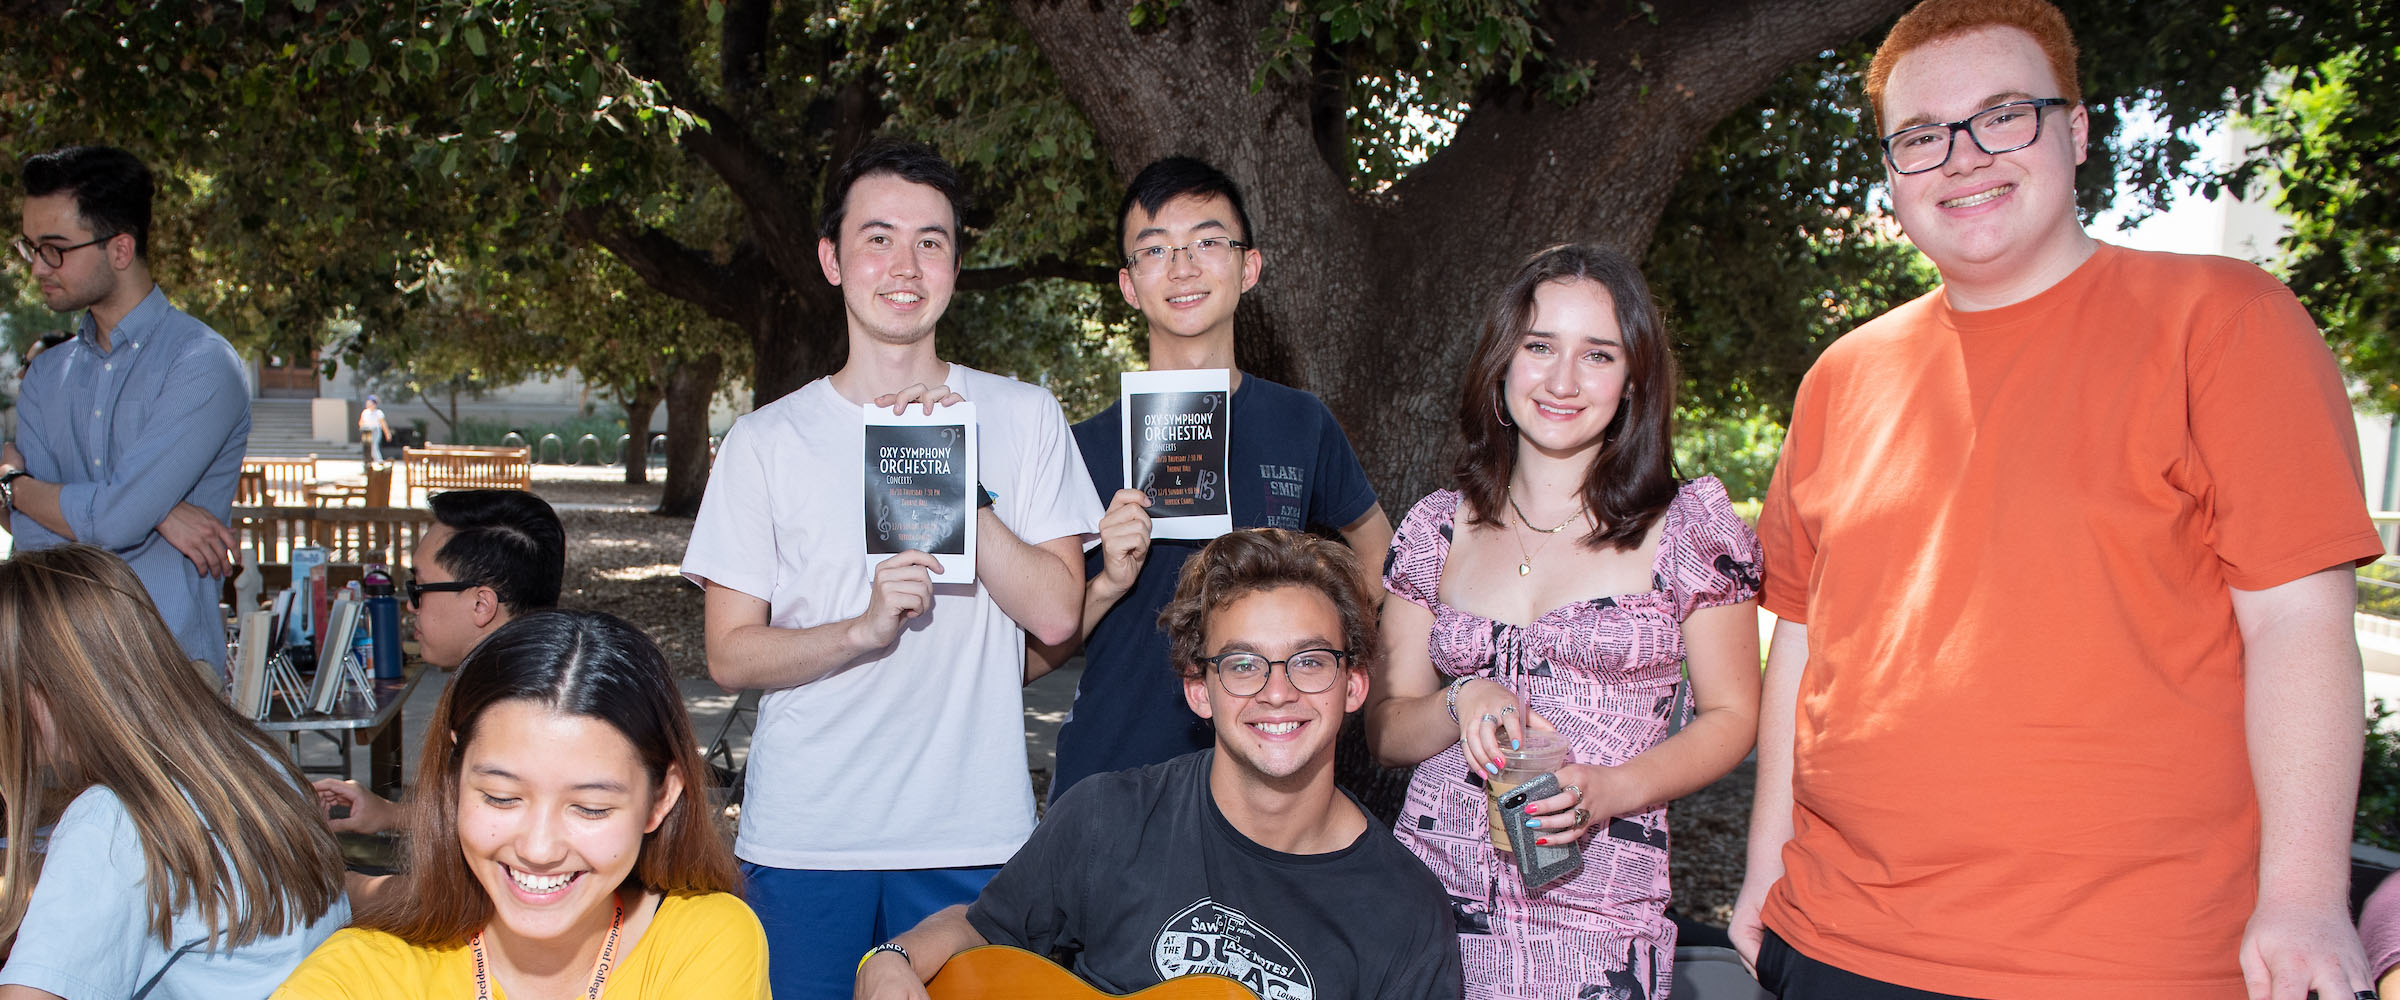 Oxy Music students stand smiling at a fundraiser